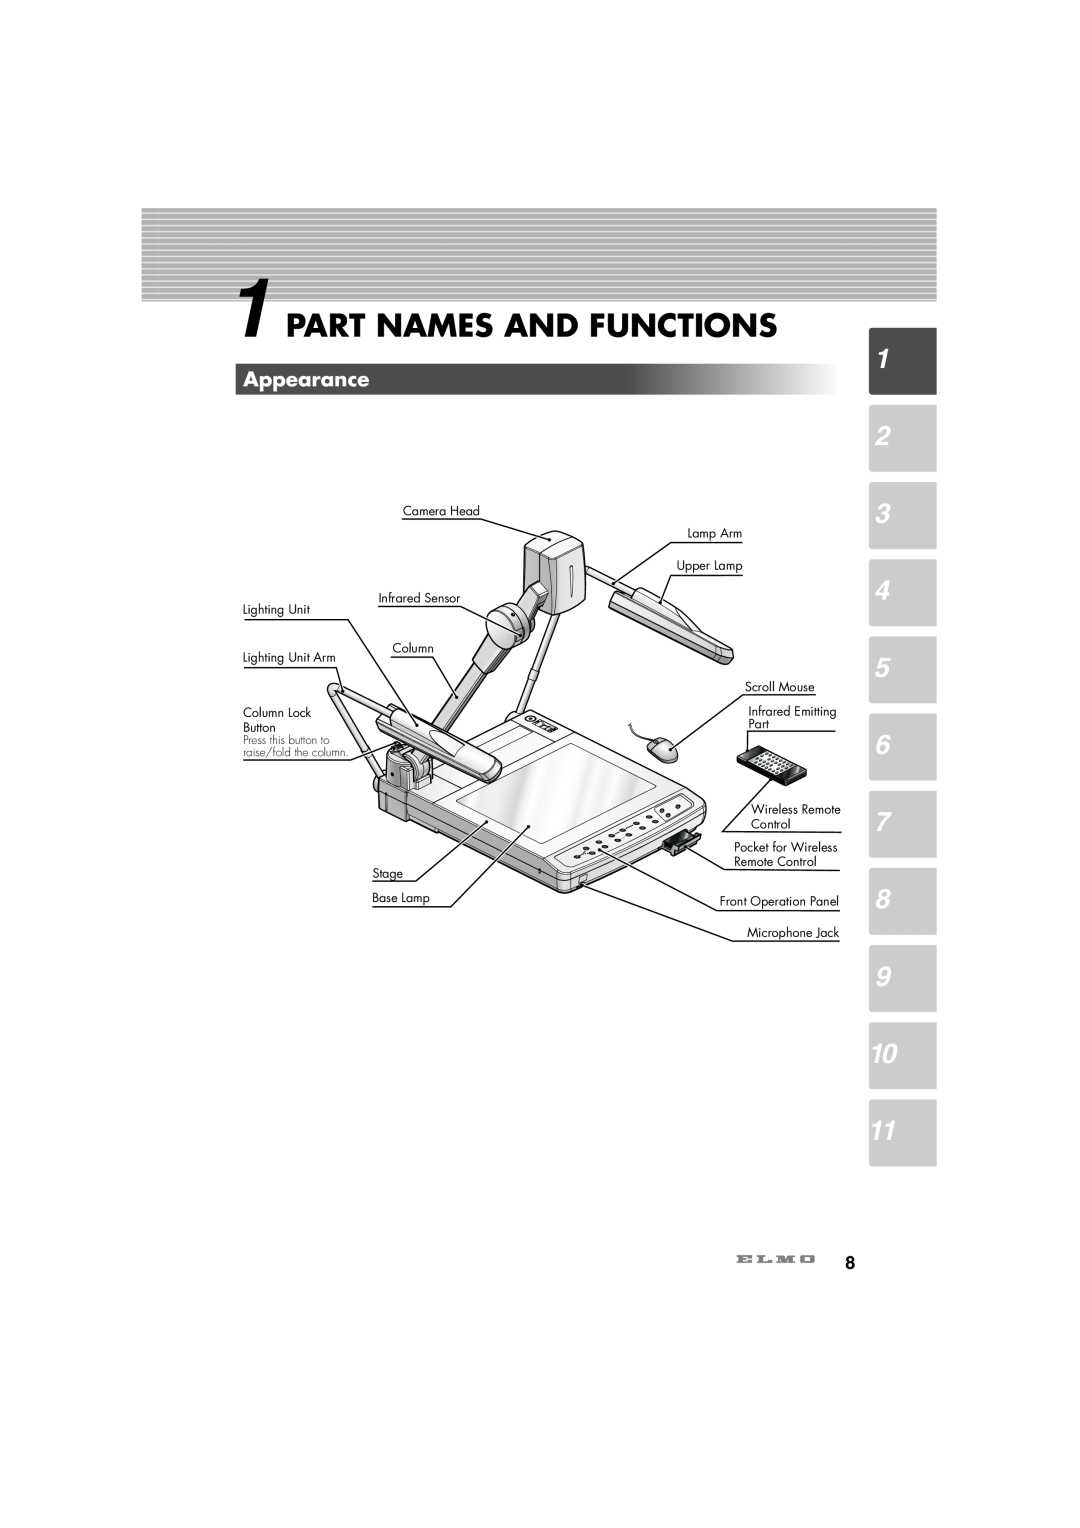 Elmo HV-7100SX instruction manual Part Names And Functions, Appearance 